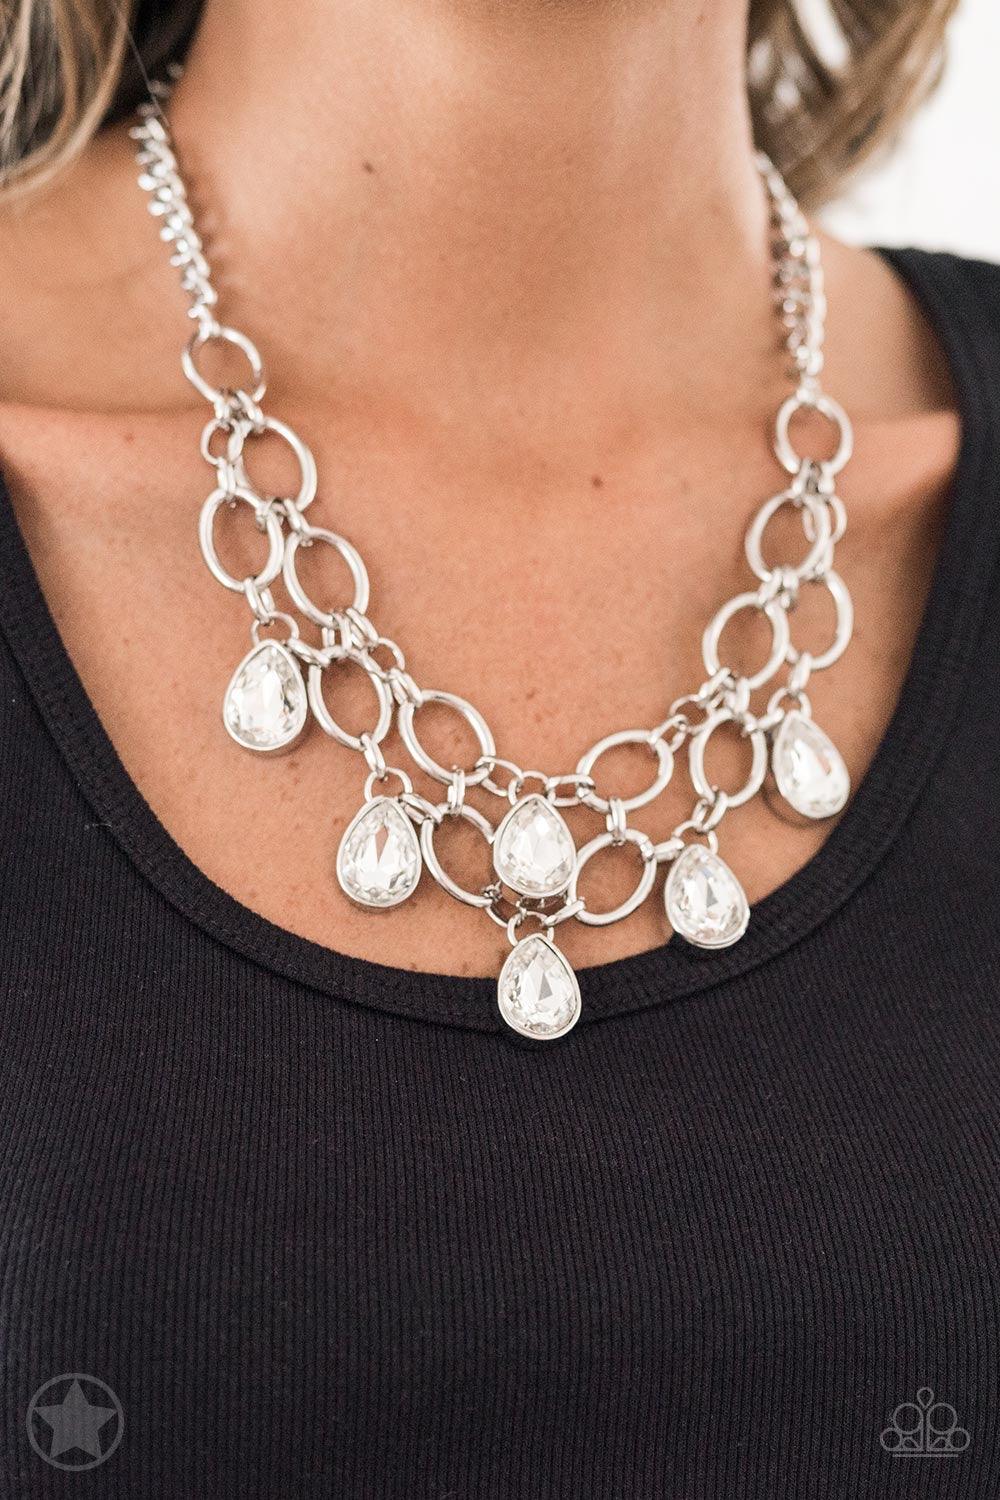 Paparazzi Accessories Show-Stopping Shimmer - White Joined by dainty silver links, two rows of dramatic silver chain layer below the collar in a fierce fashion. Glittery white teardrops drip from the glistening layers, adding a timeless shimmer to the sho